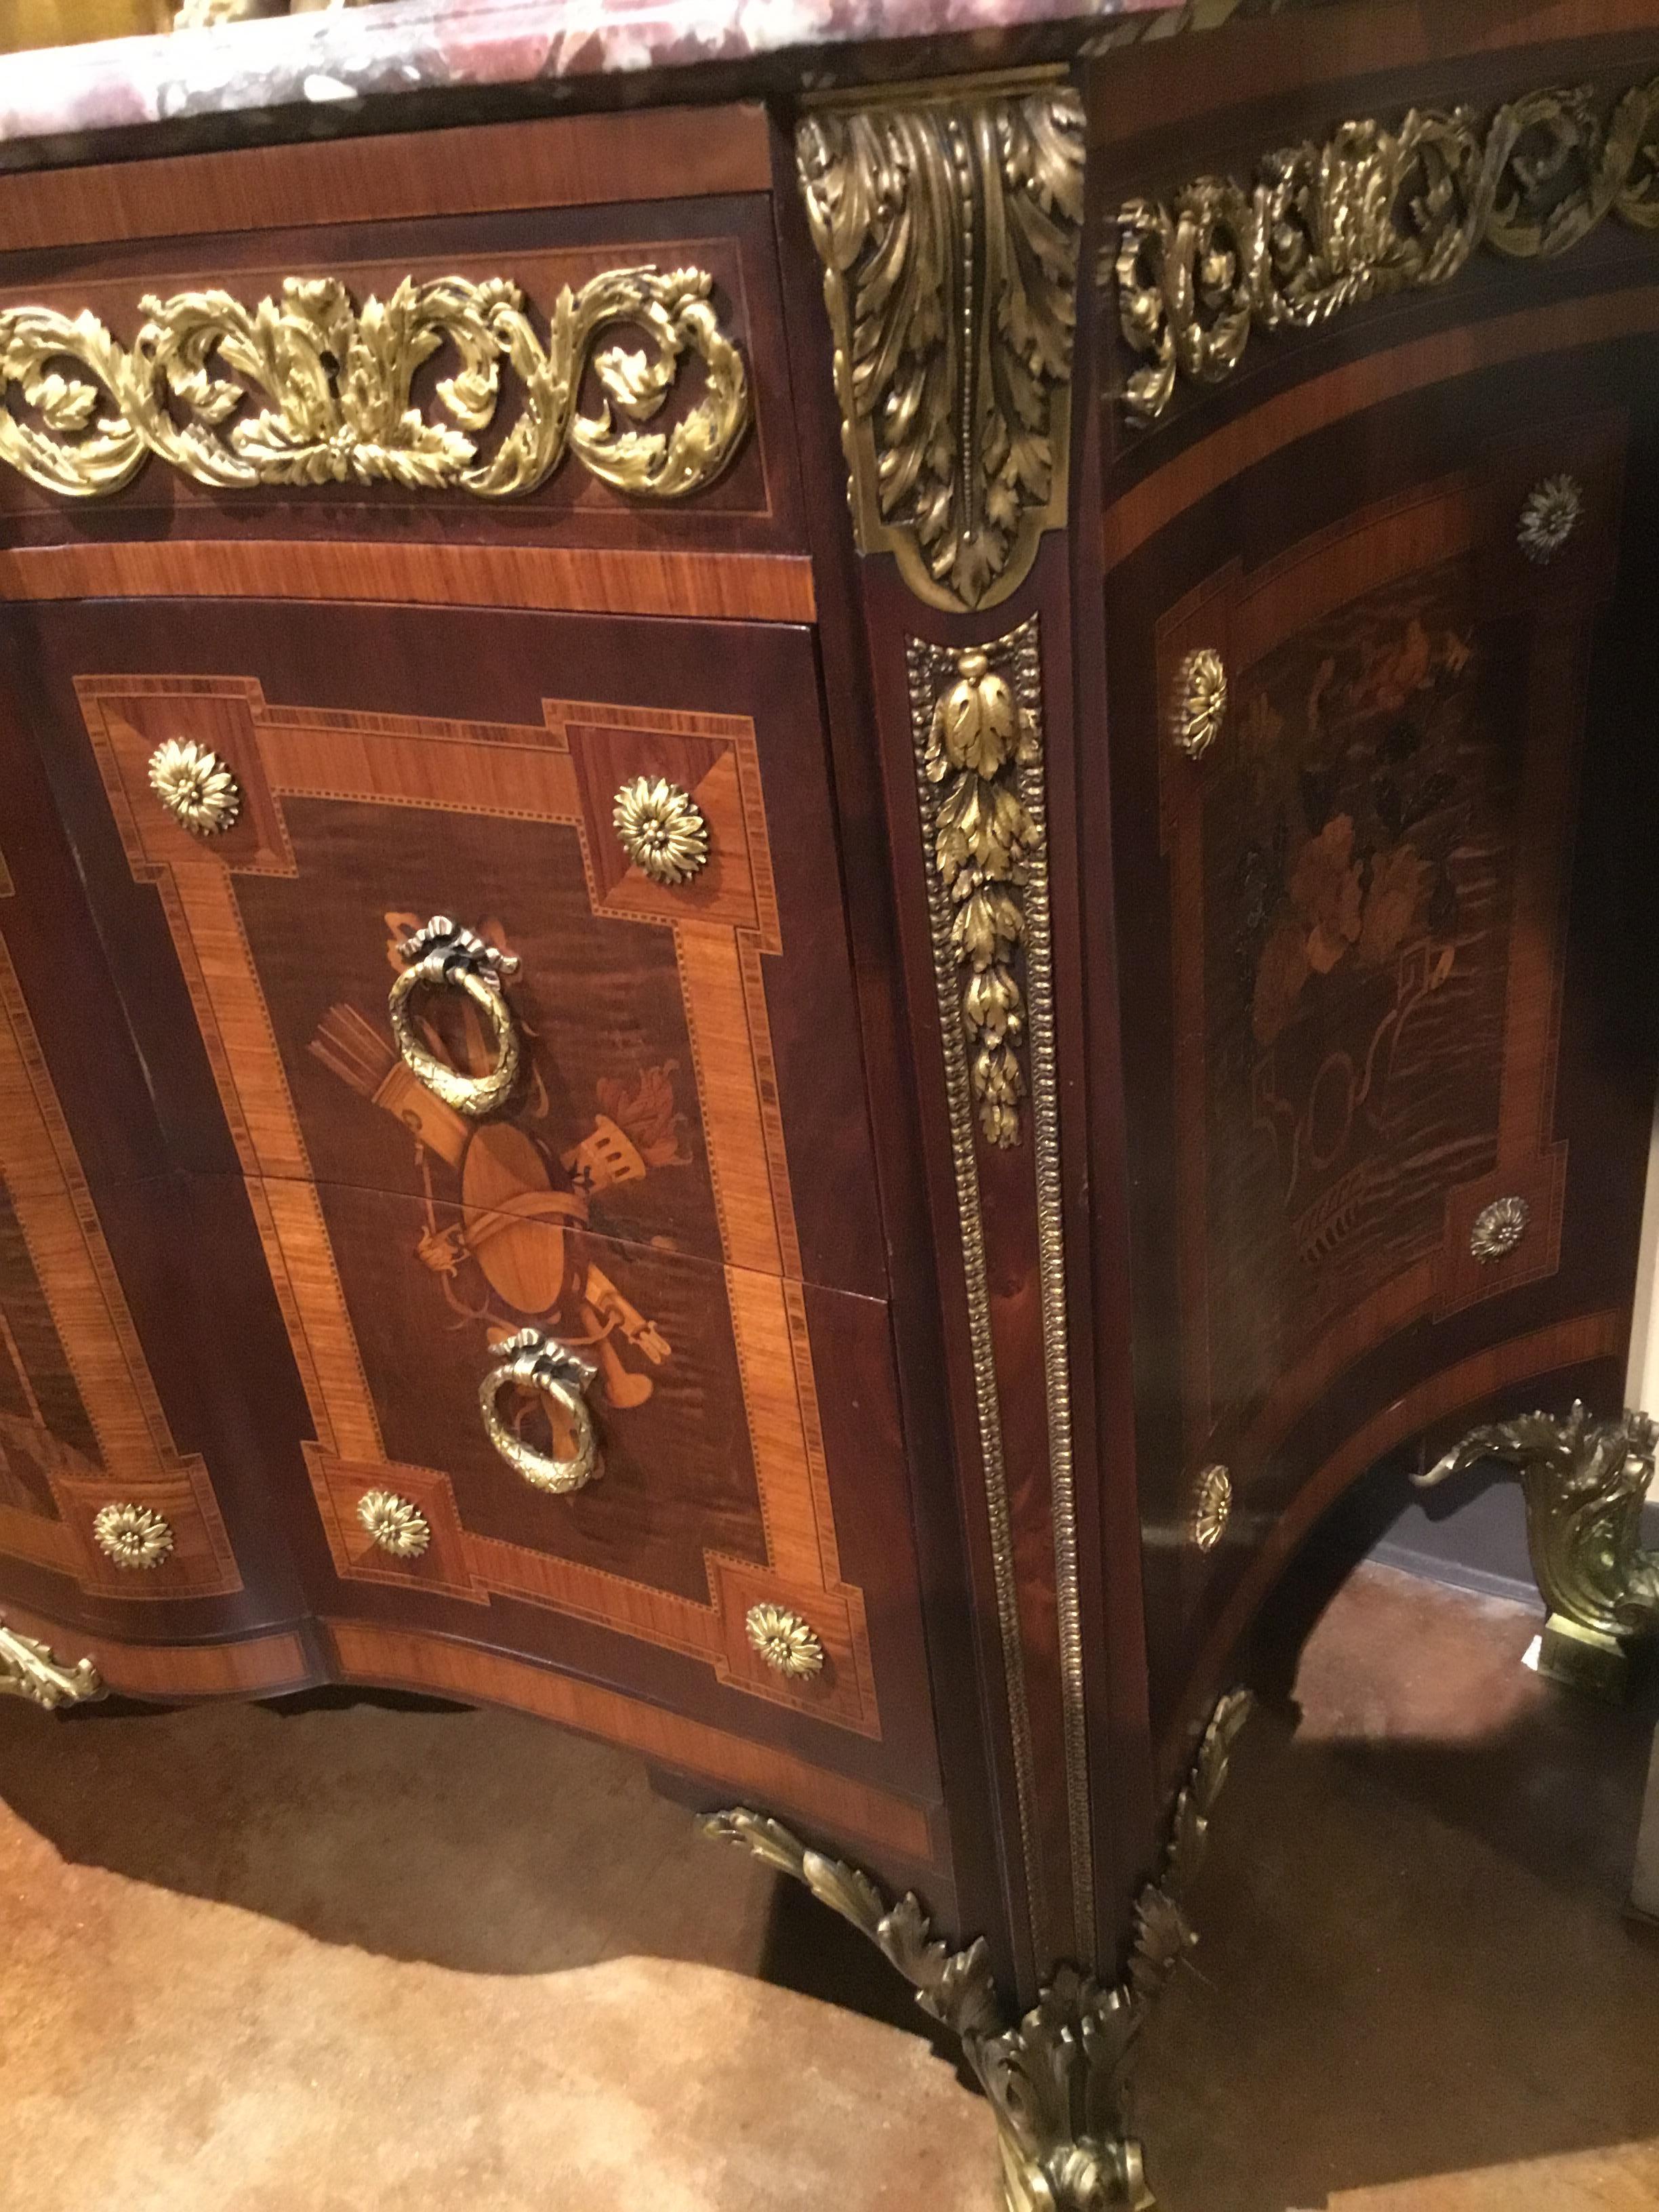 French bronze and Marquetry commode. The original crafted by ebineste Reisner for the Louvre
Palace. Very fine quality overall having a shaped marble top with shades of mauve, cream and
gray hues. The commode utilizes exotic woods of kingwood,